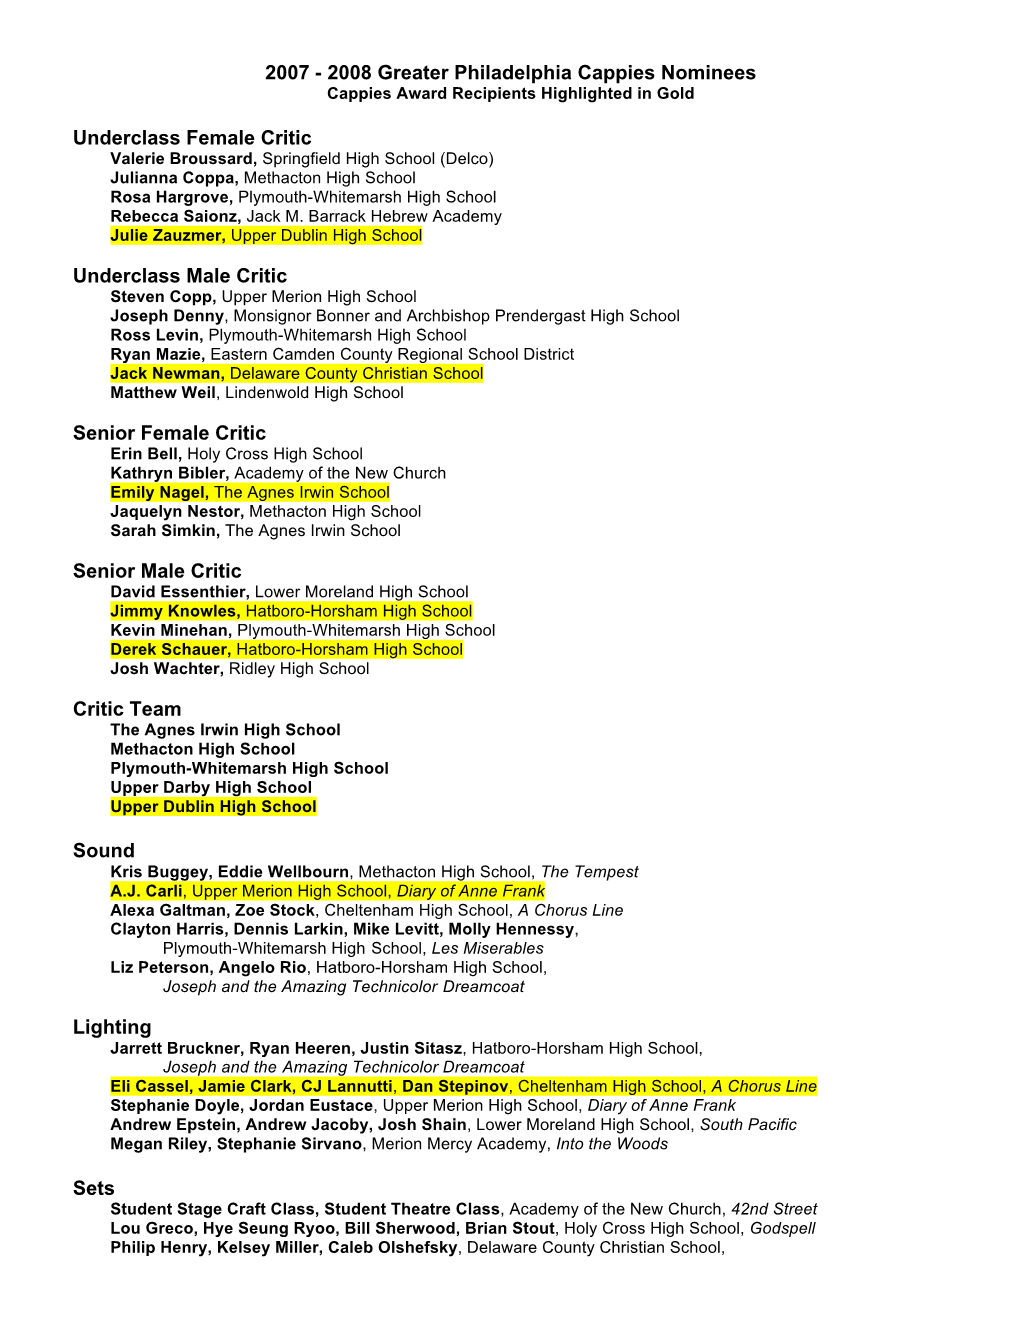 2007 - 2008 Greater Philadelphia Cappies Nominees Cappies Award Recipients Highlighted in Gold